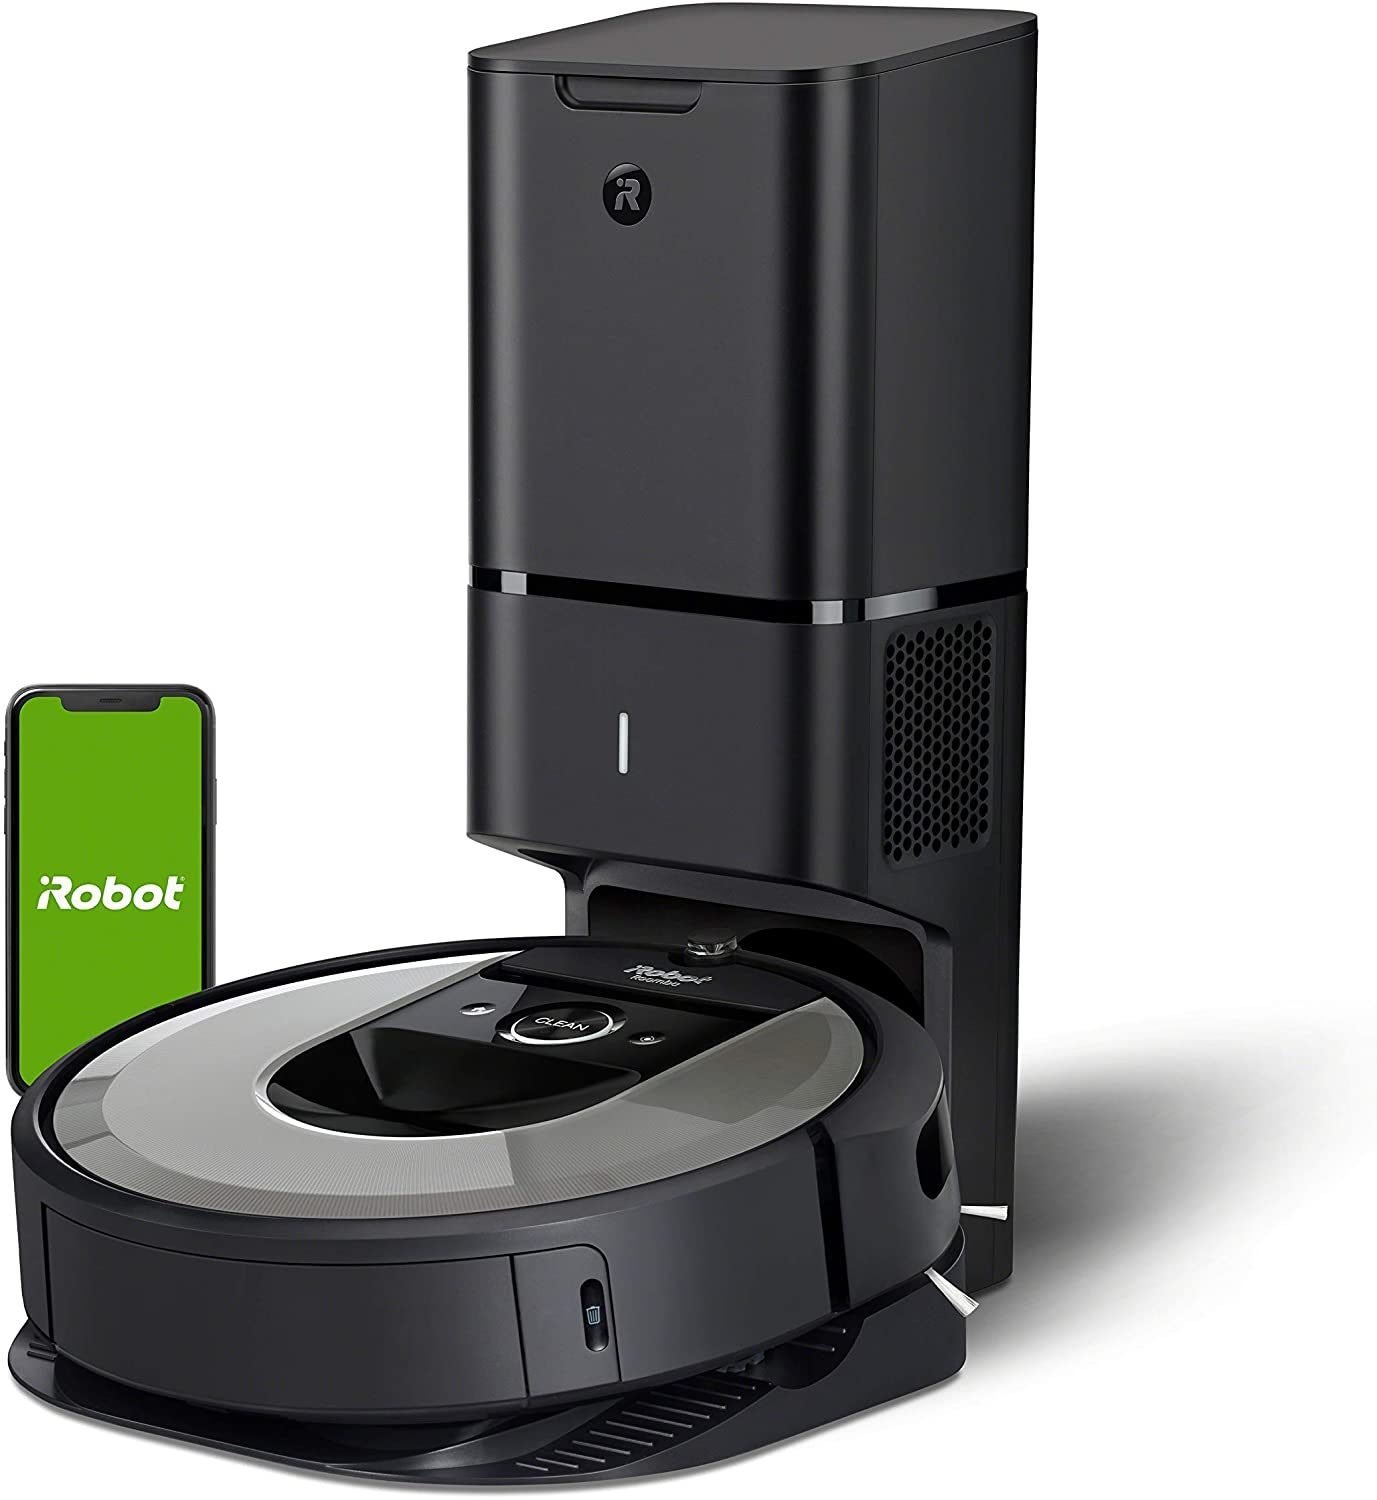 Are You Ready to Try a Roomba Vacuum? Now’s the Time